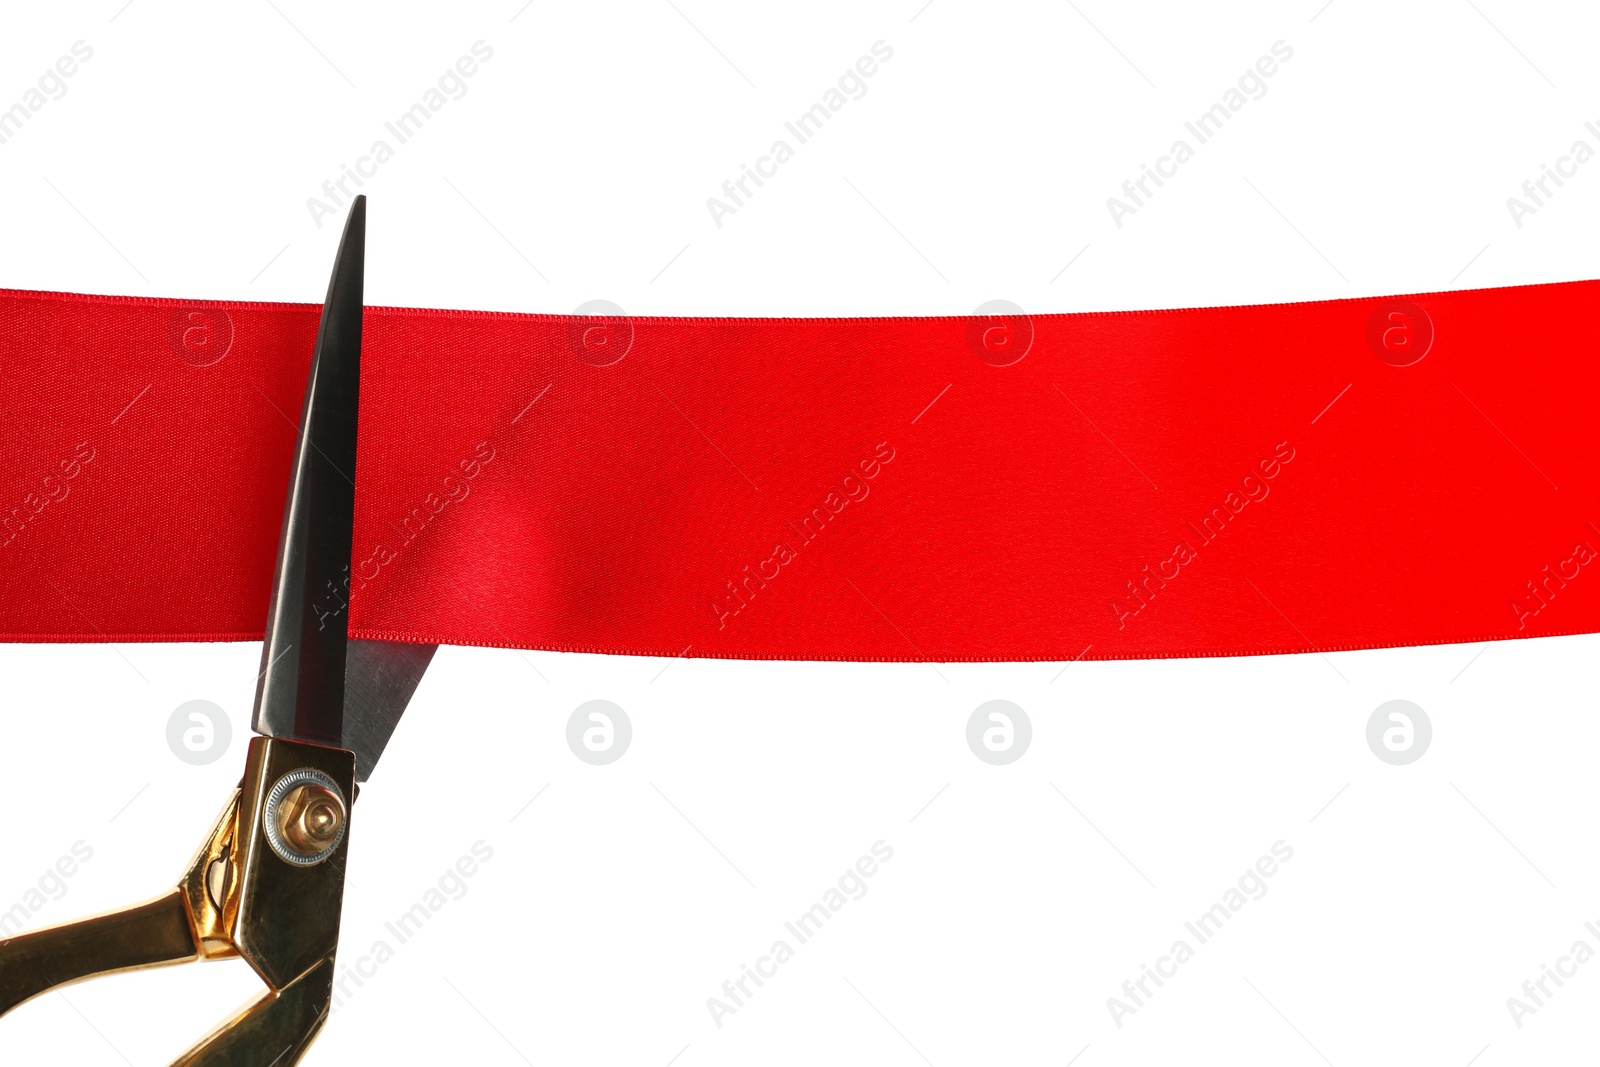 Photo of Cutting red ribbon with scissors on white background